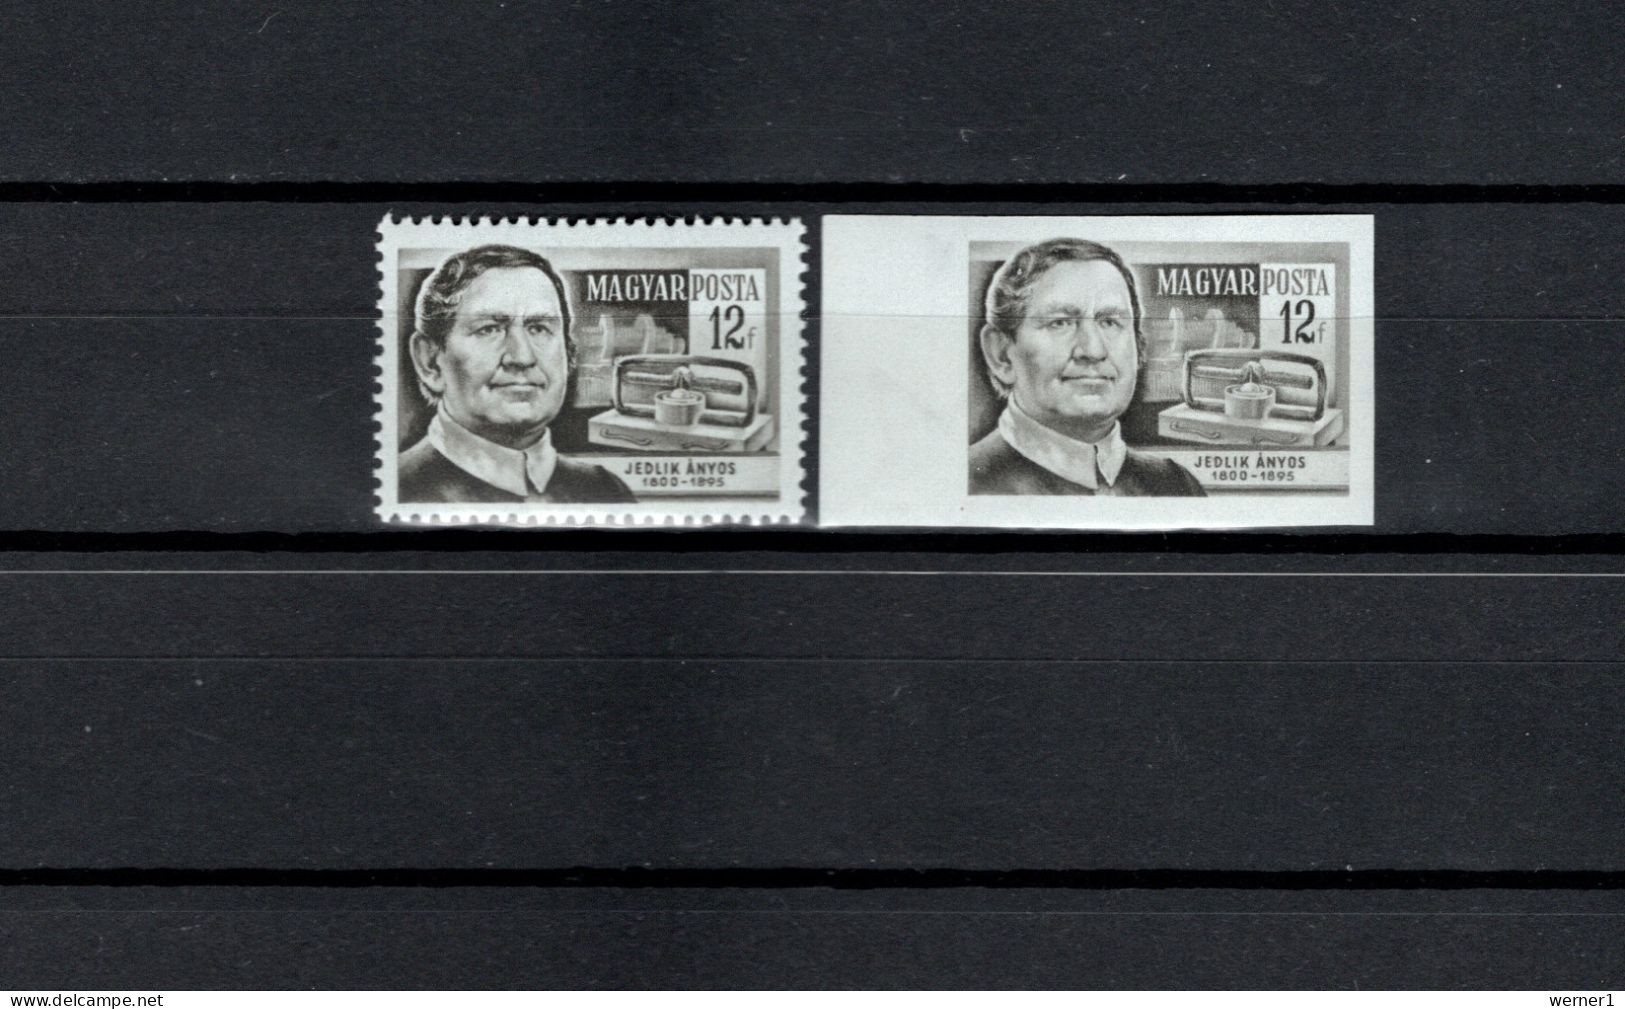 Hungary 1954 Space, Anyos Jedlik 12F Stamp Perf. And Imperf. MNH - Europa